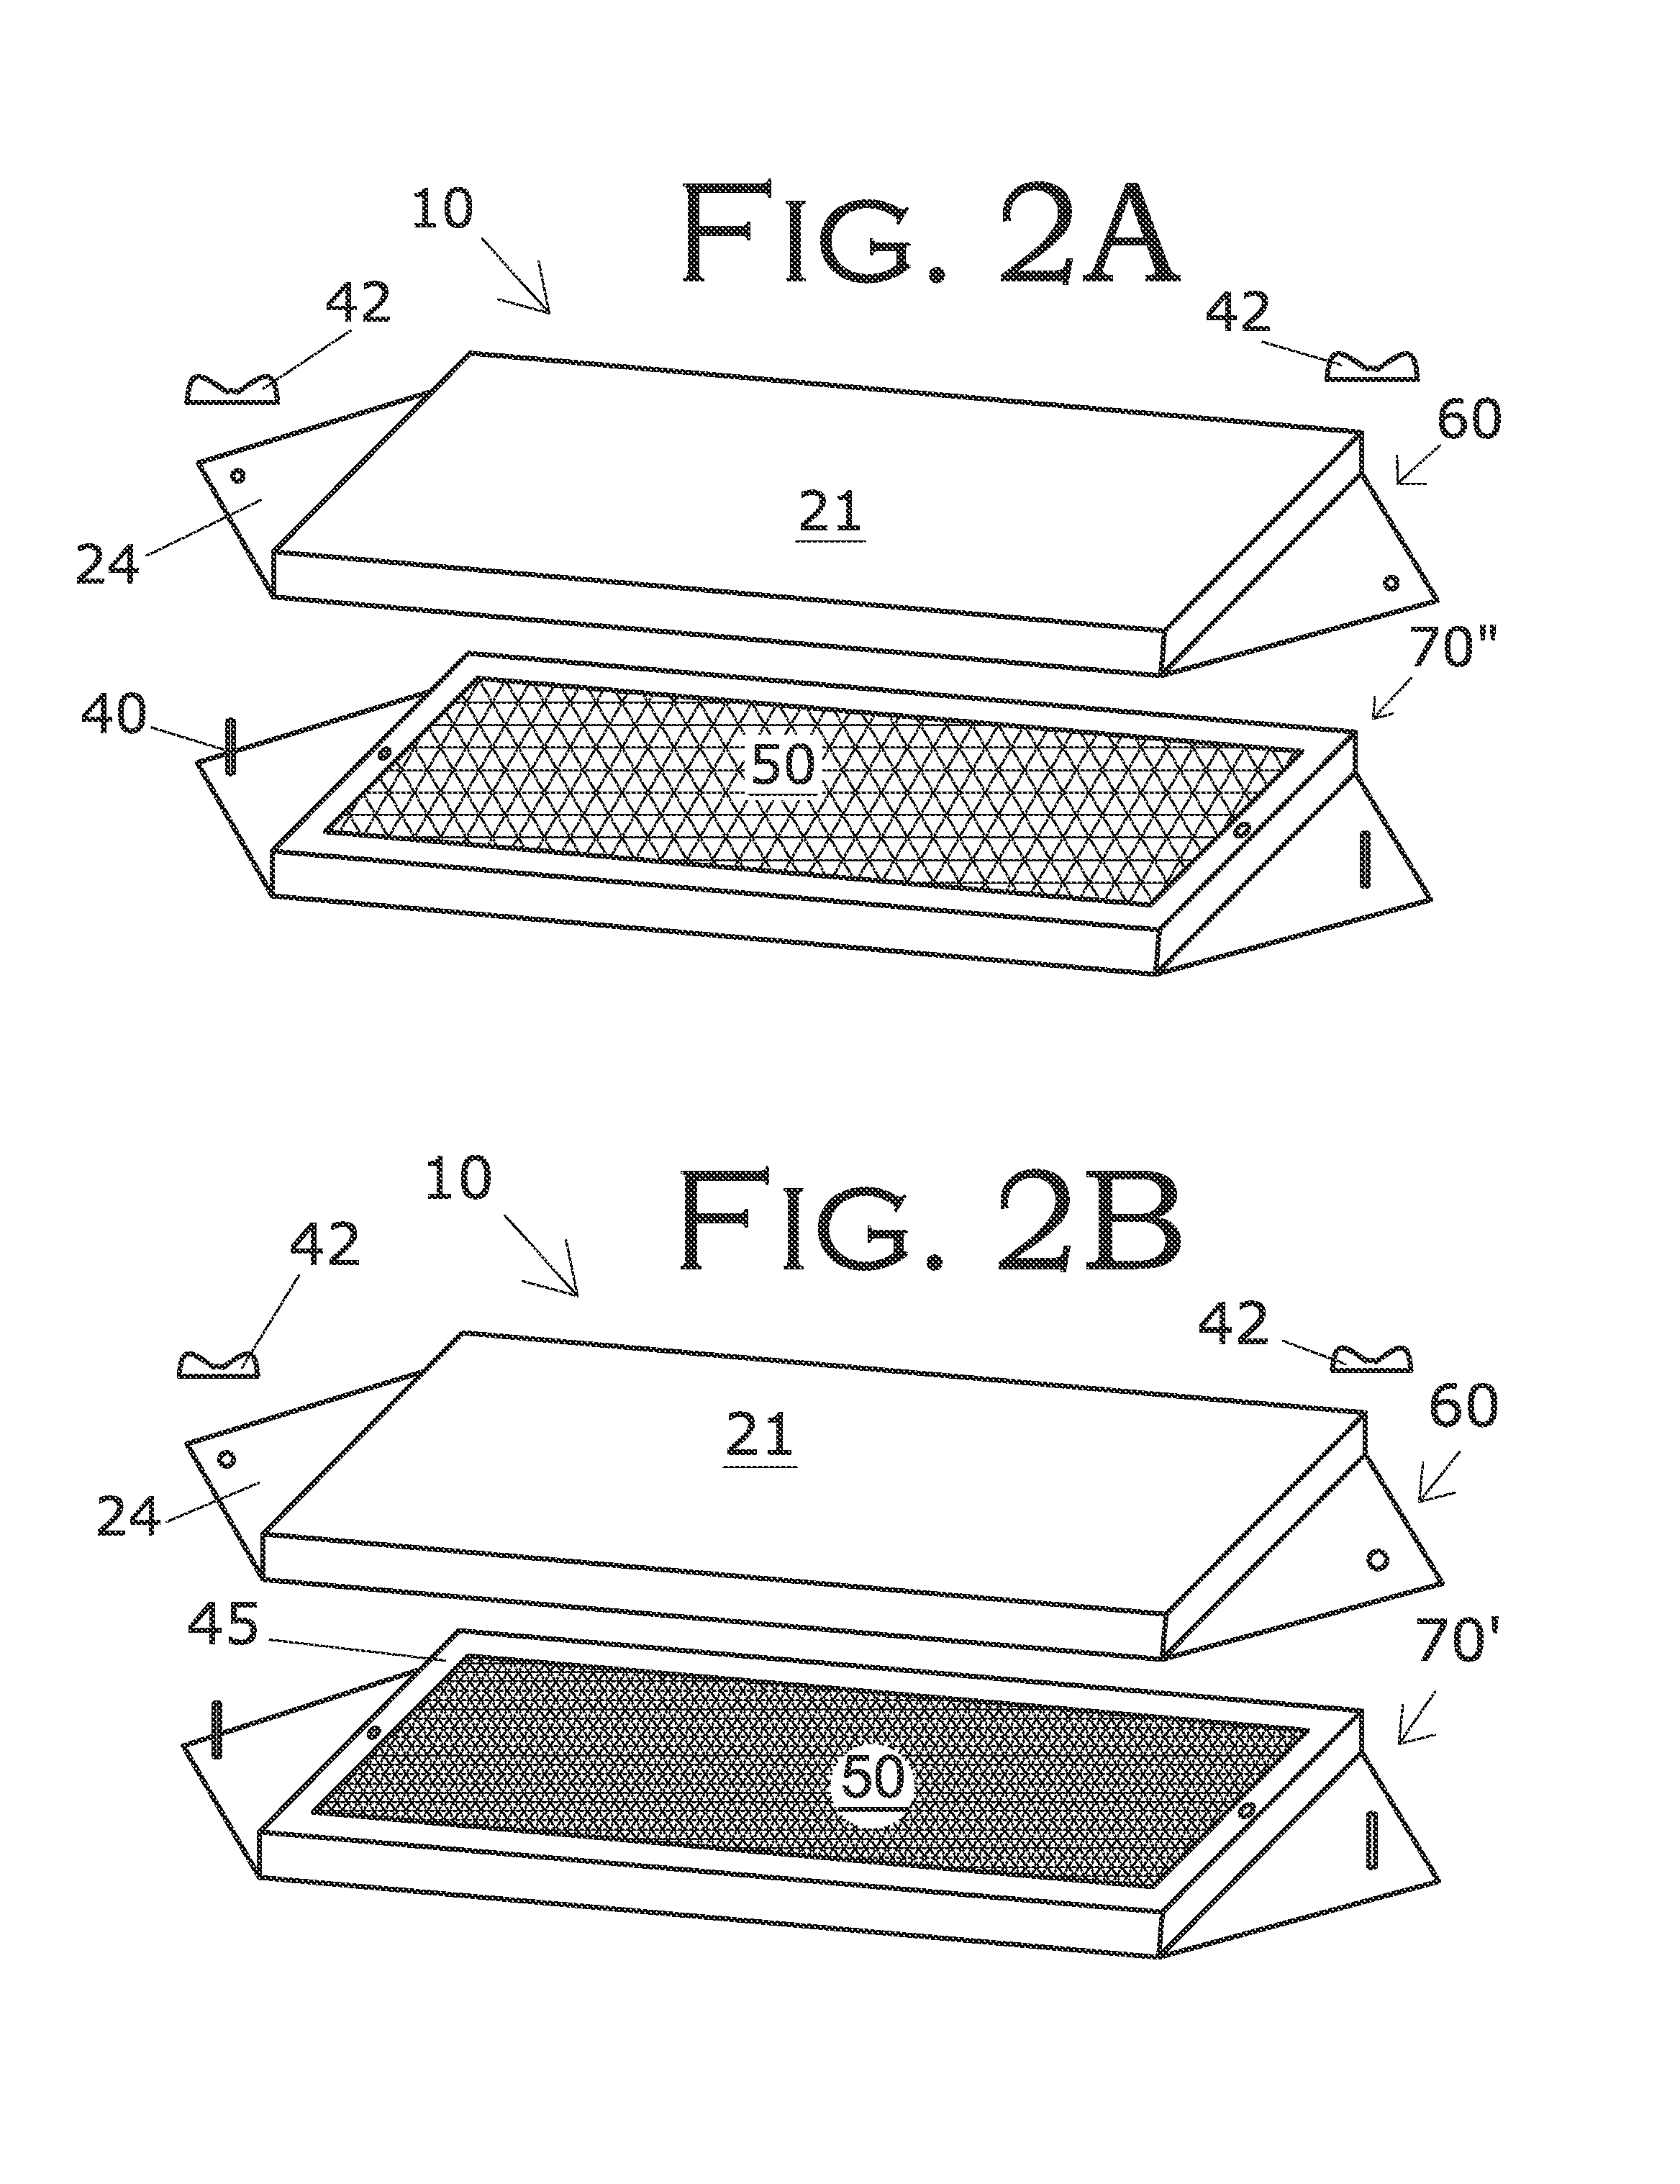 Multi-module vent cover system for a roof ventilation vent